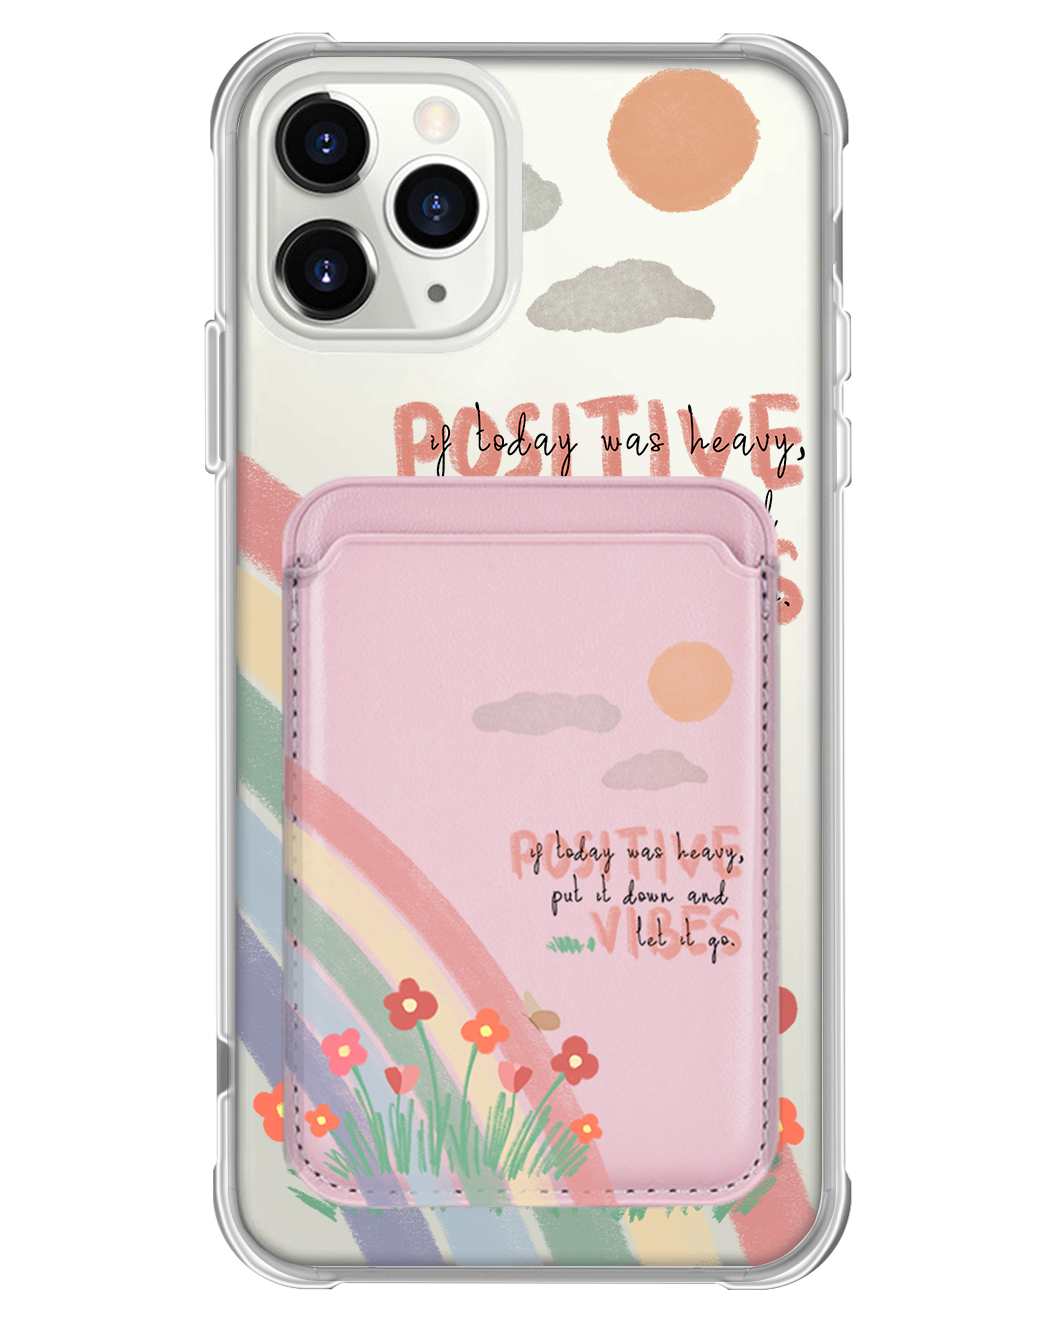 iPhone Magnetic Wallet Case - Positive Vibes